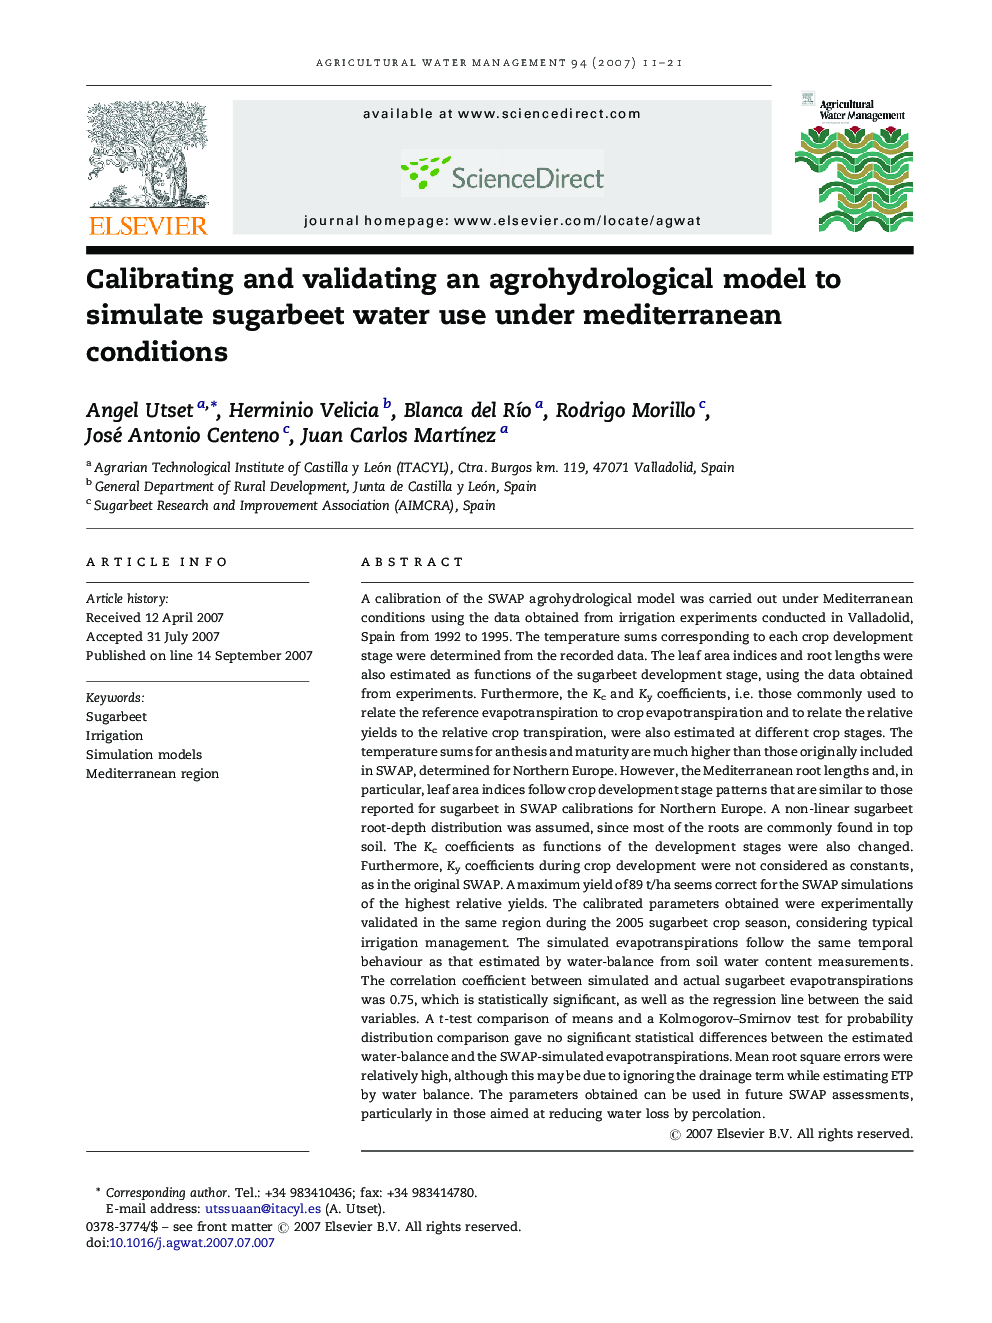 Calibrating and validating an agrohydrological model to simulate sugarbeet water use under mediterranean conditions